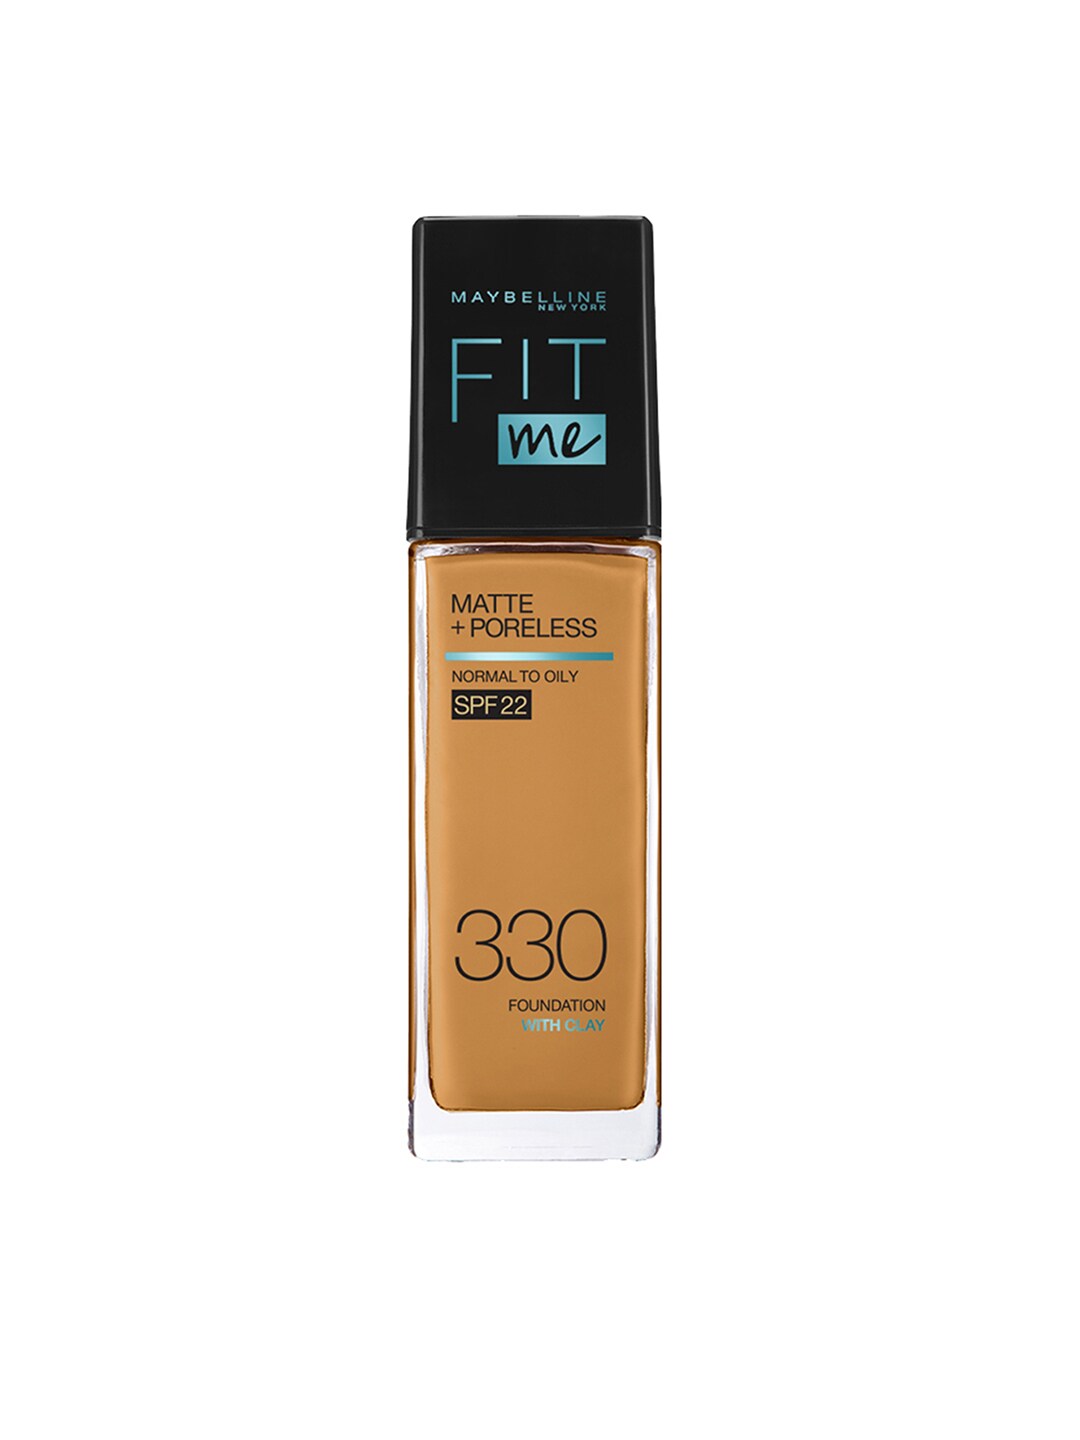 Maybelline New York Fit Me Normal to Oily Matte Poreless Foundation - Toffee 330 30 ml Price in India